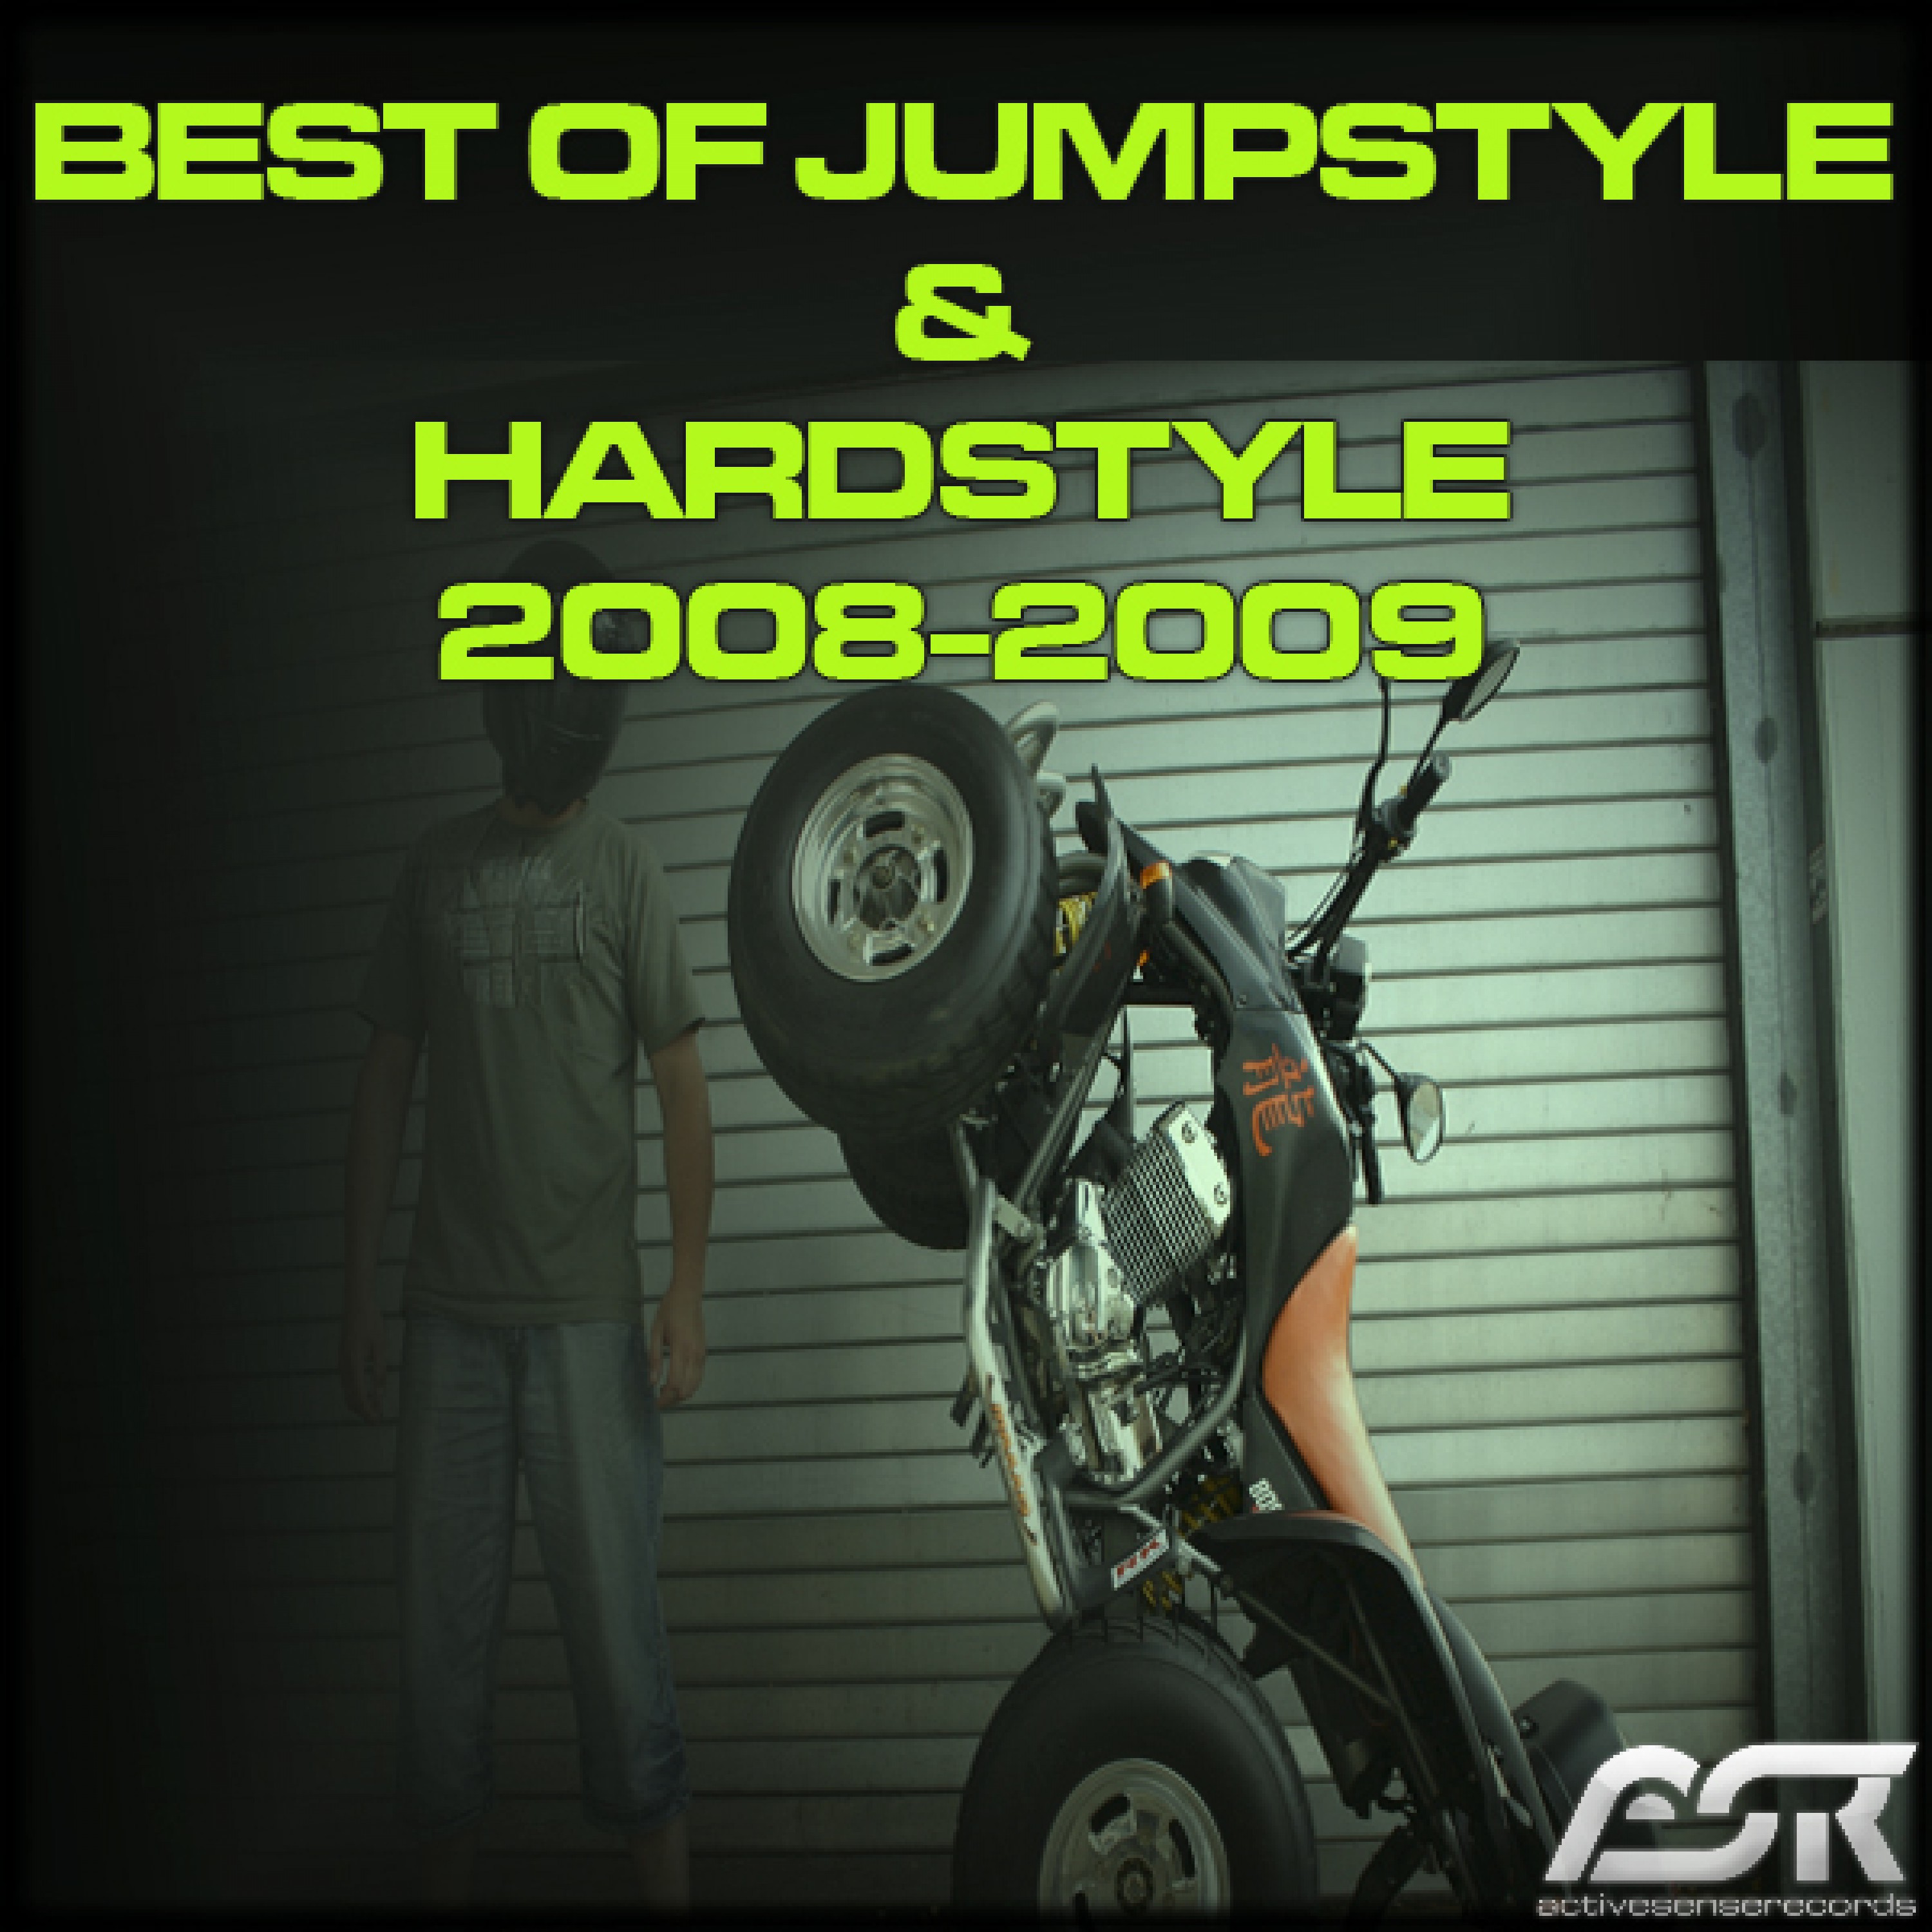 Best of Jumpstyle & Hardstyle 2008-2009